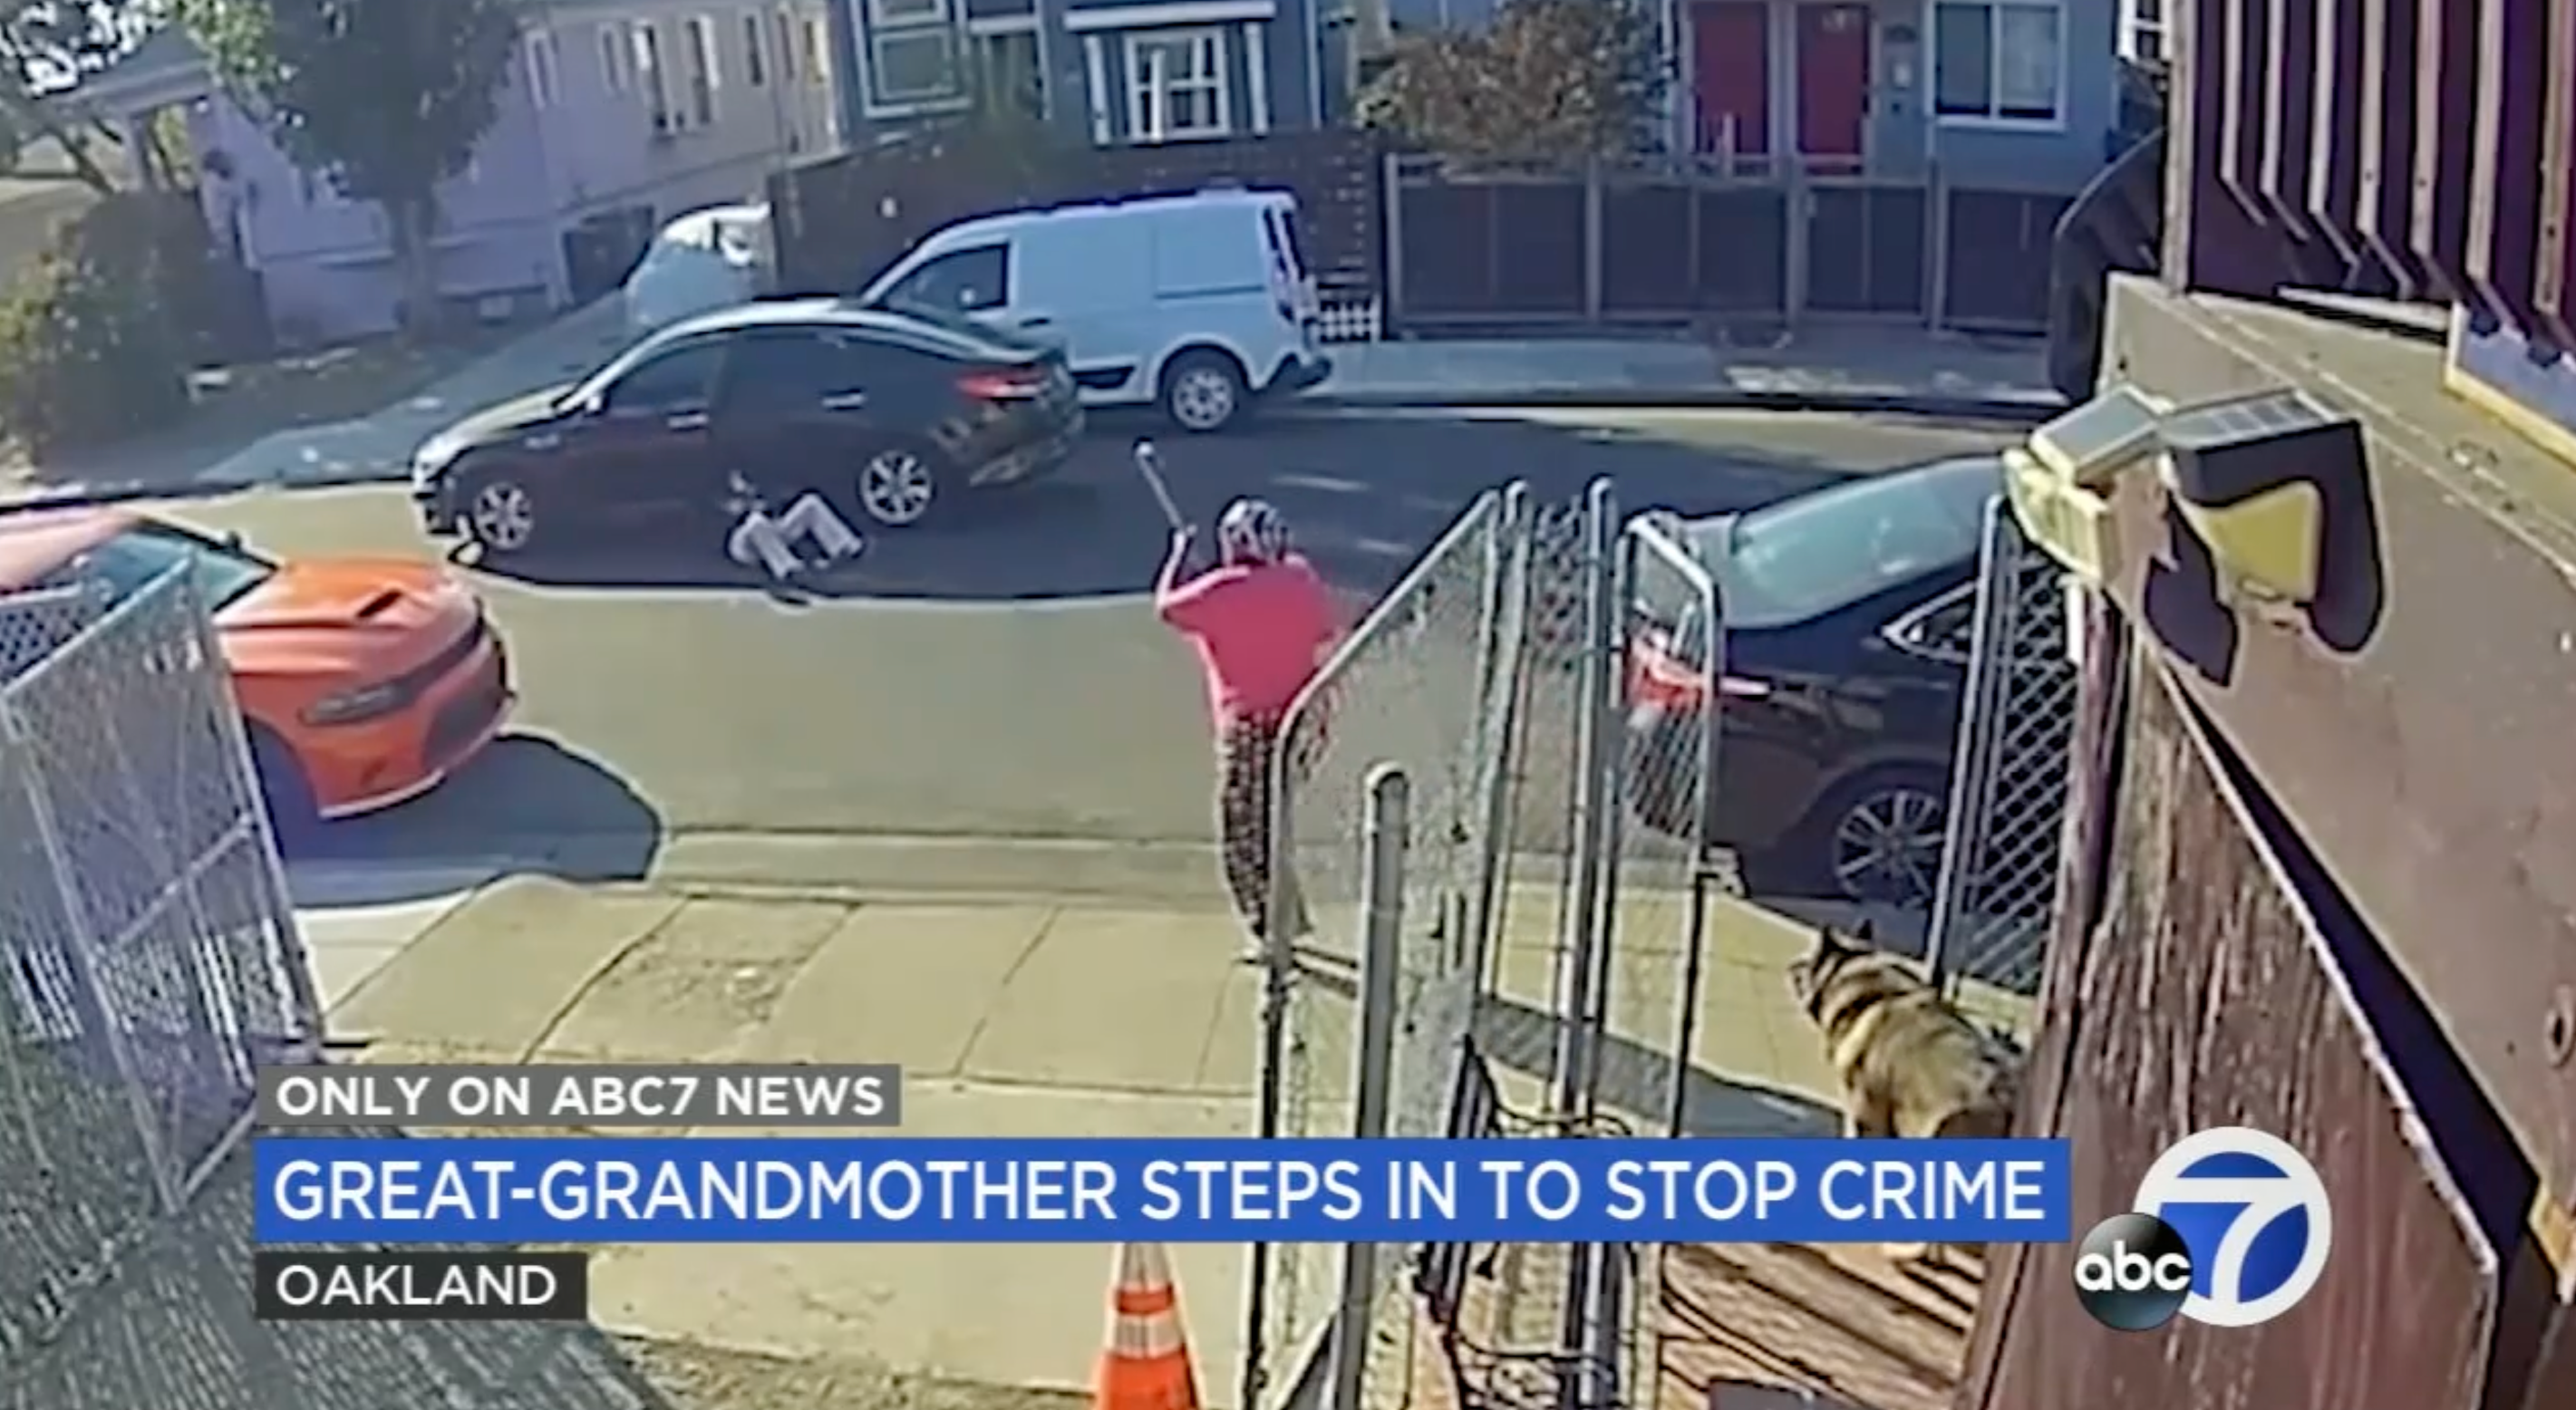 Video: Great-grandmother, 76, pulls out her cane, scares away thug who tried to steal elderly neighbor’s purse.